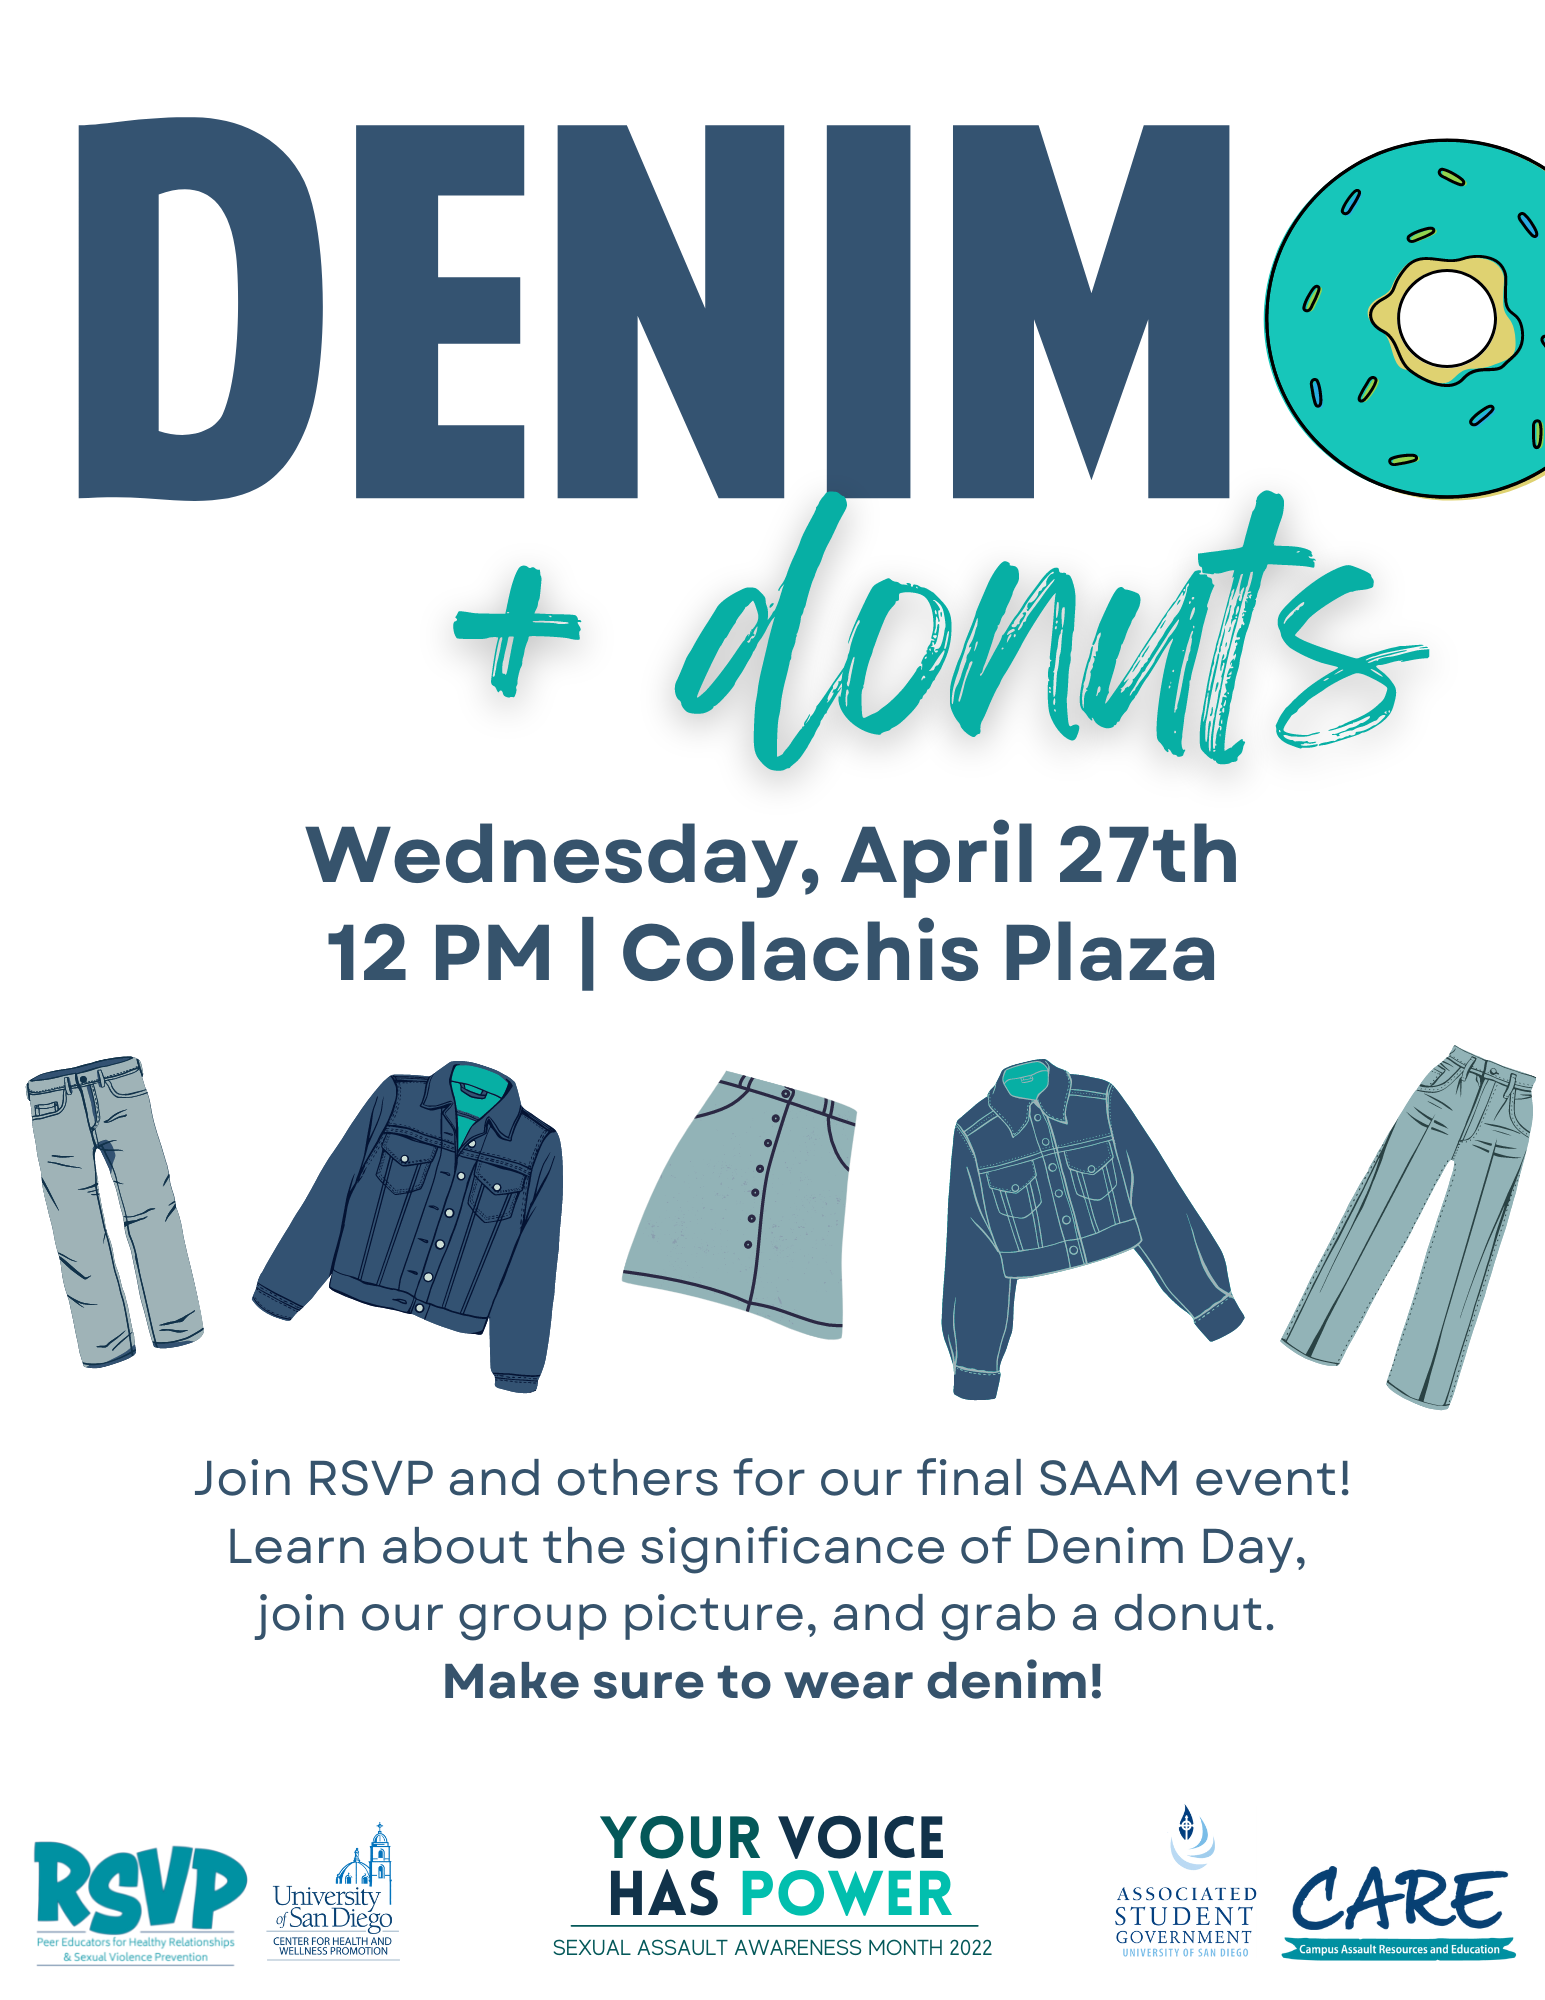 a white flier with the following text: Denim + Donuts, Wednesday, April 27th, 12 PM | Colachis Plaza. Join RSVP and others for our final SAAM event! Learn about the significance of Denim Day, join our group picture, and grab a donut. Make sure to wear denim!